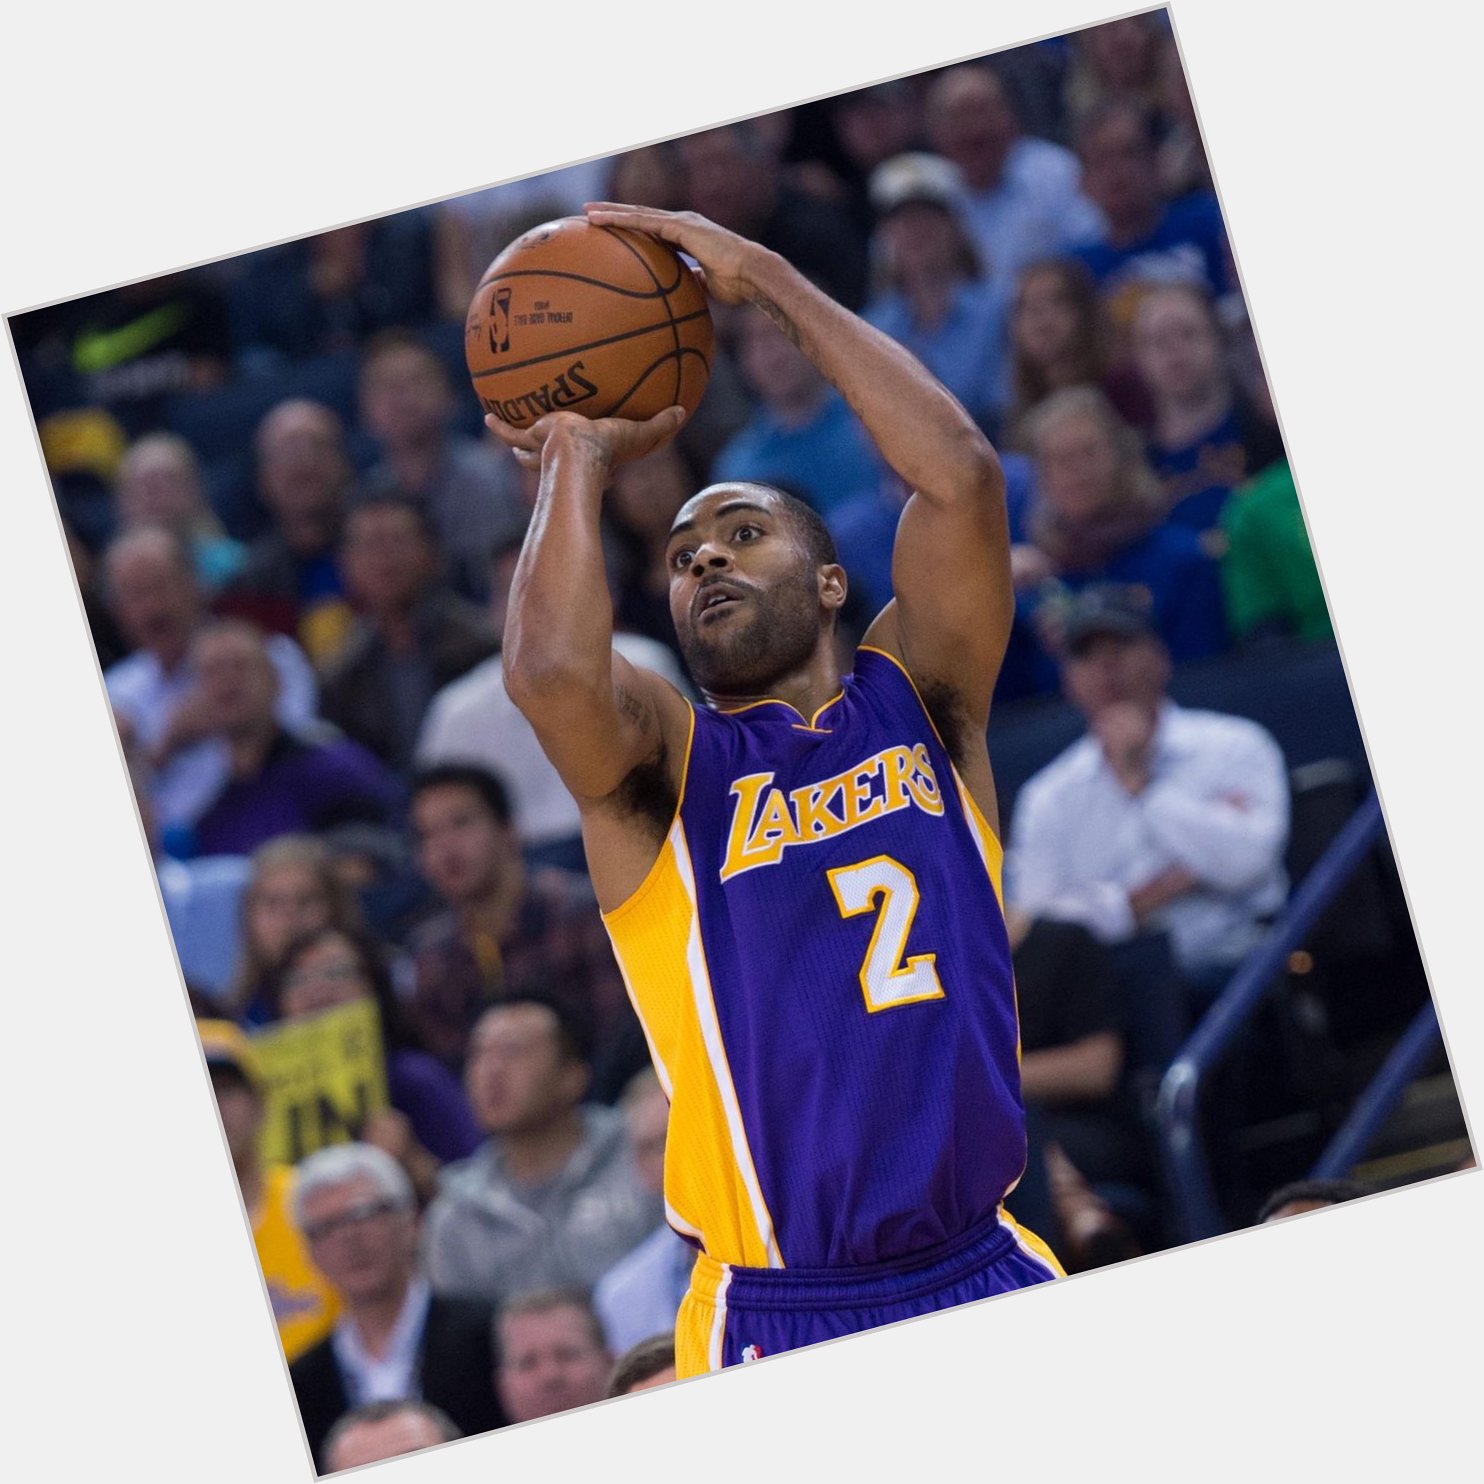 Wayne Ellington has shot 47.4% from 3 in the last 5 games. 

Happy Birthday to the golden arm. 